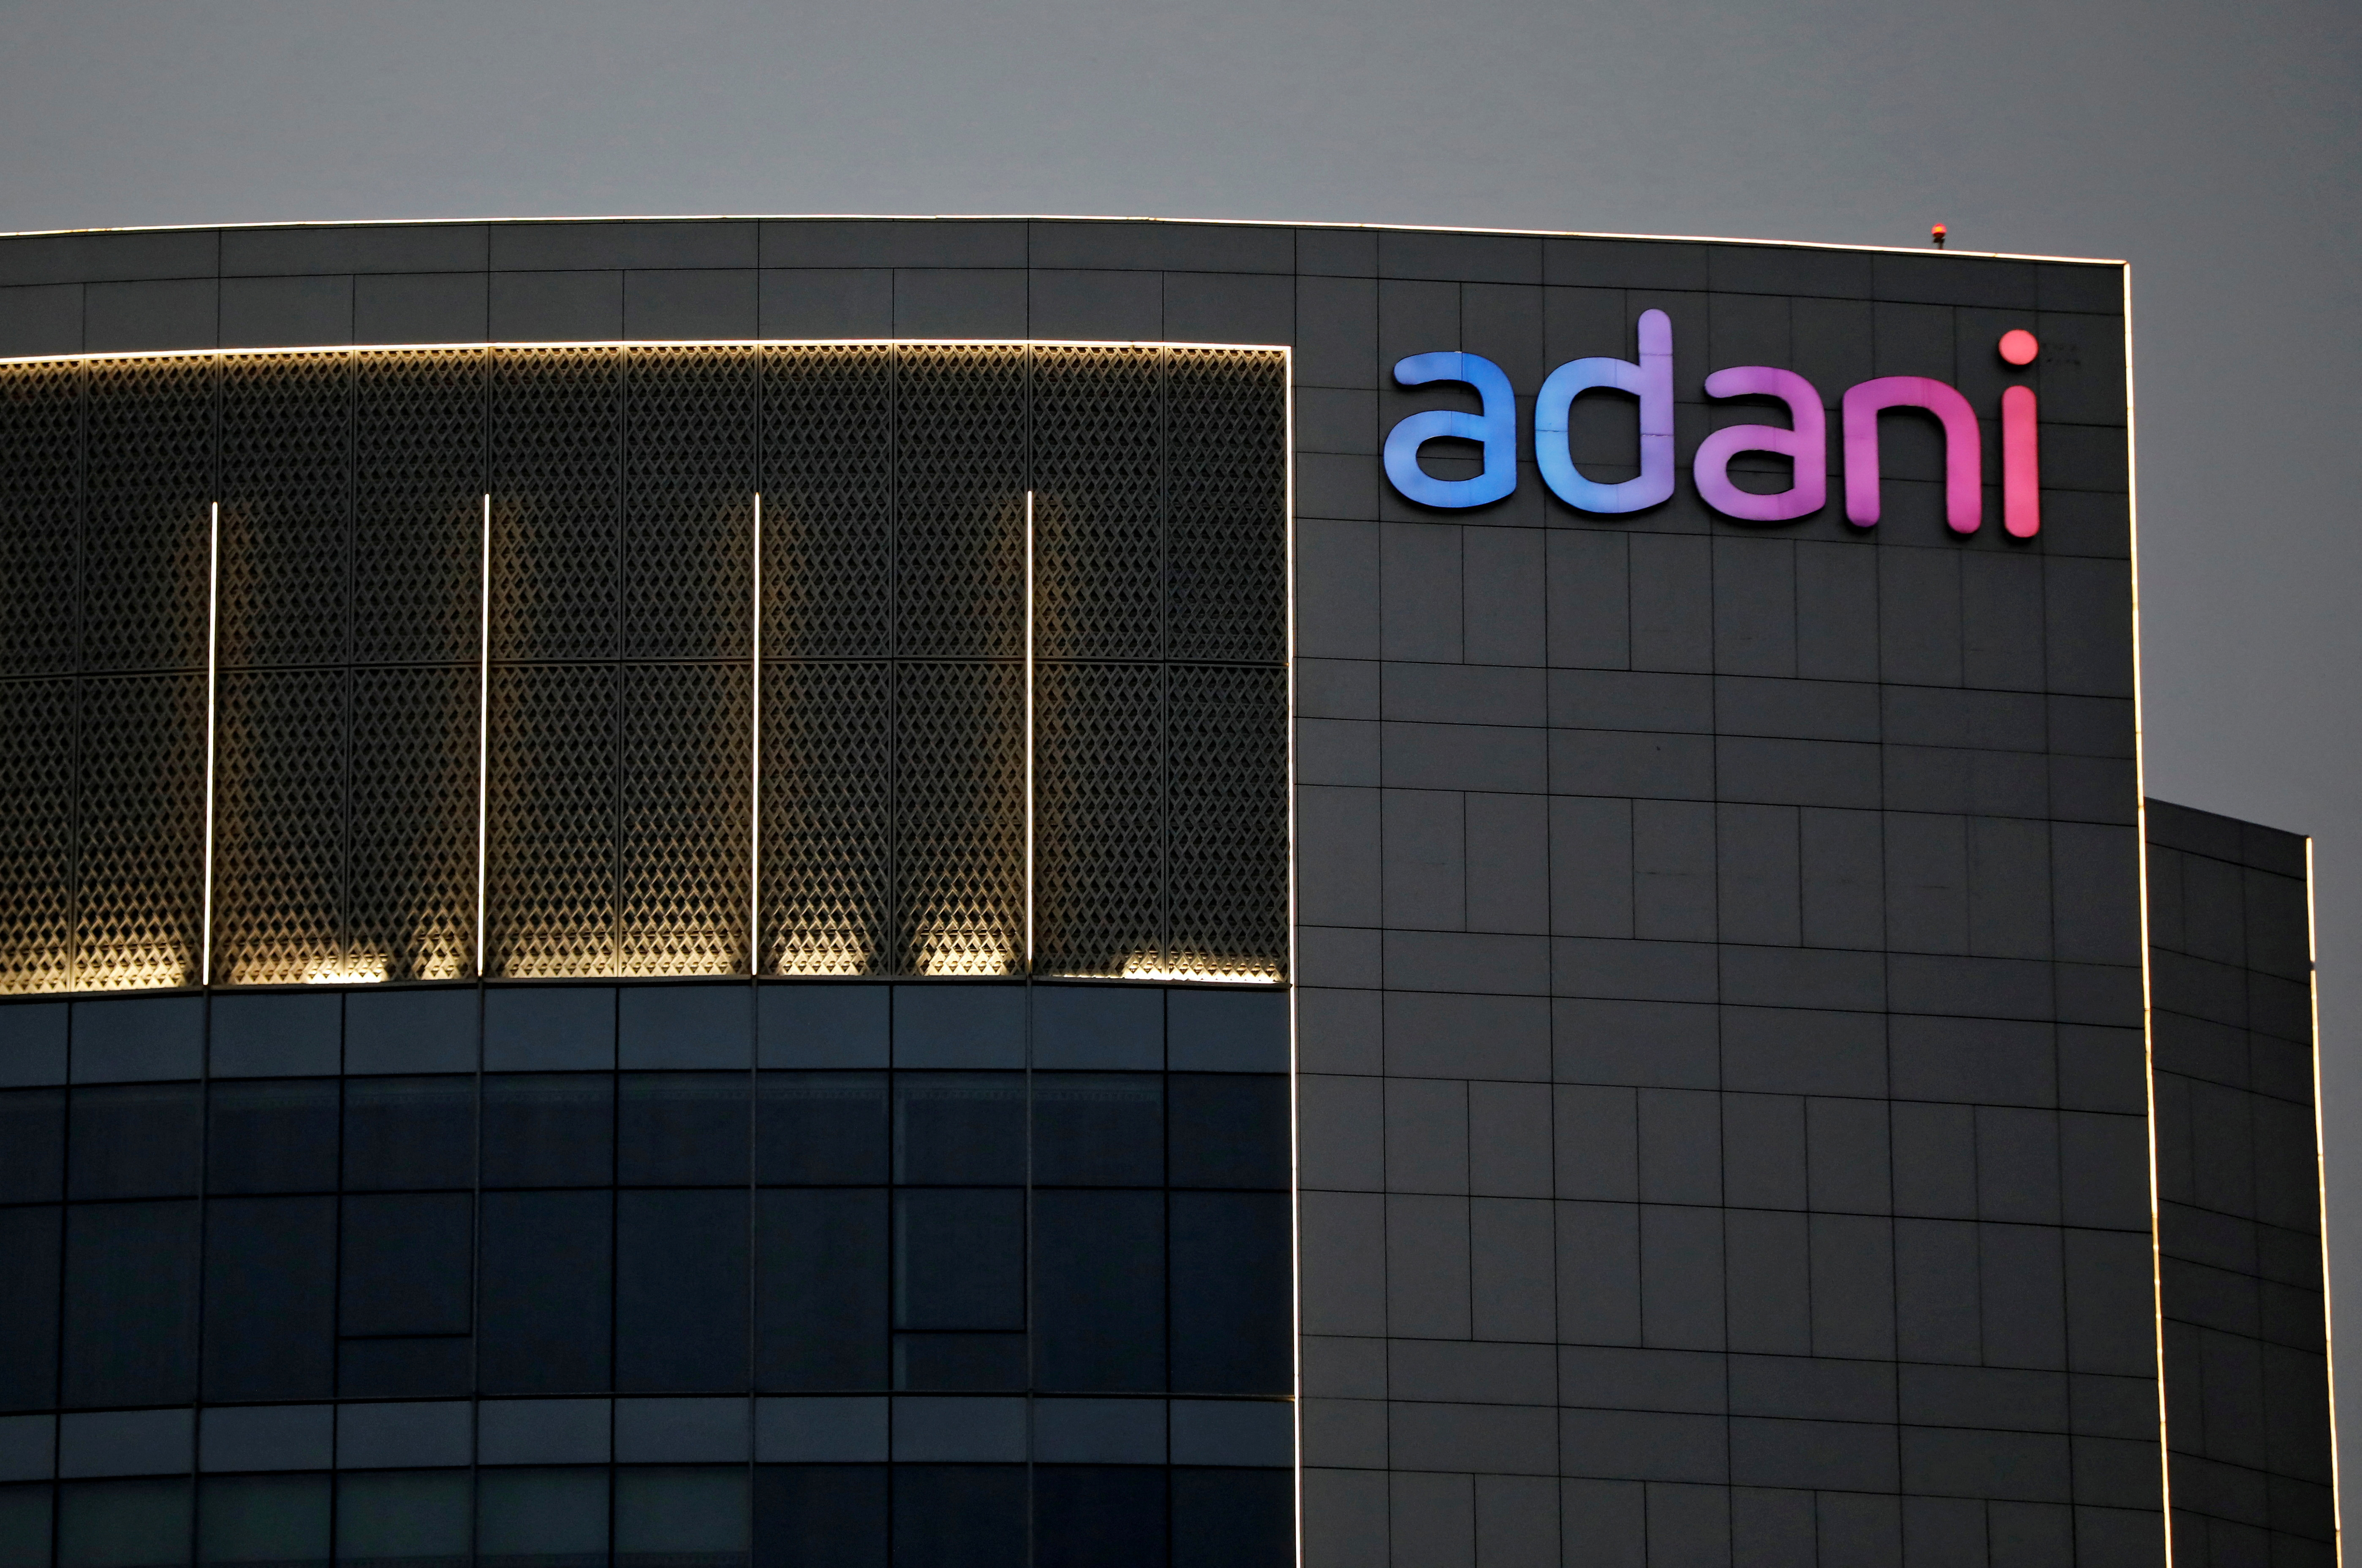 The logo of the Adani Group is seen on the facade of one of its buildings on the outskirts of Ahmedabad, India, on April 13, 2021. (Reuters)